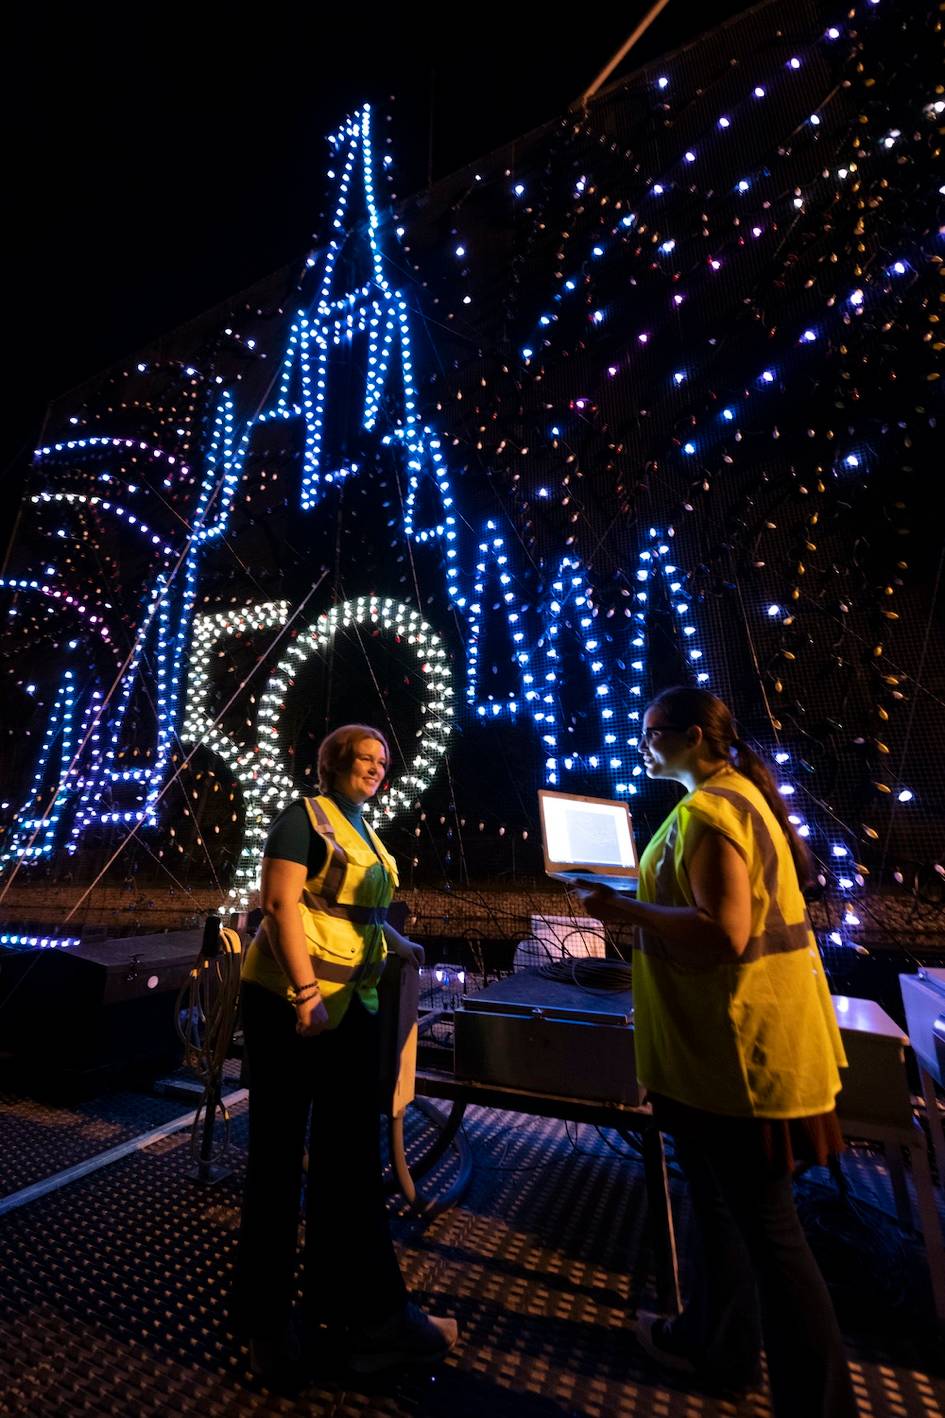 New 50th scene joining the Electrical Water Pageant for "The World's Most Magical Celebration"